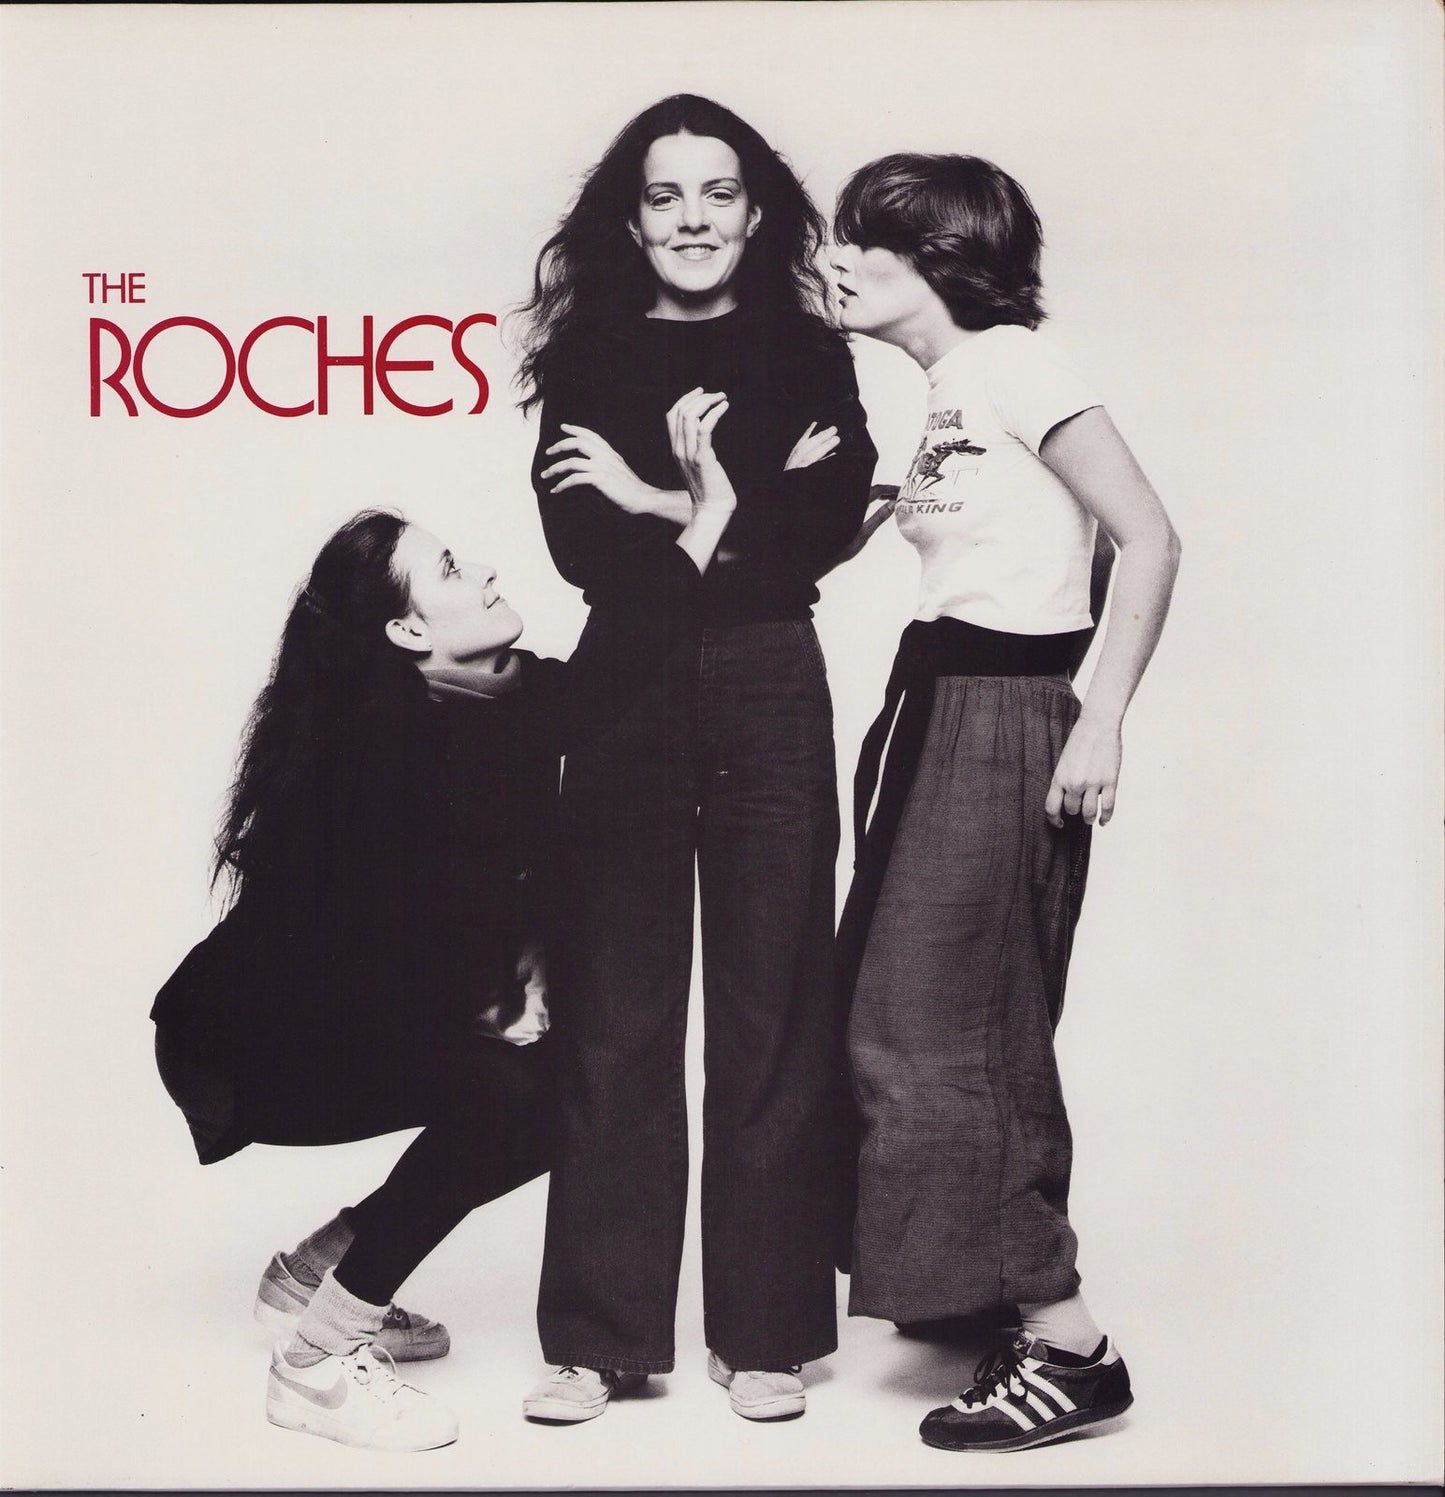 The Roches - The Roches (Vinyl LP)